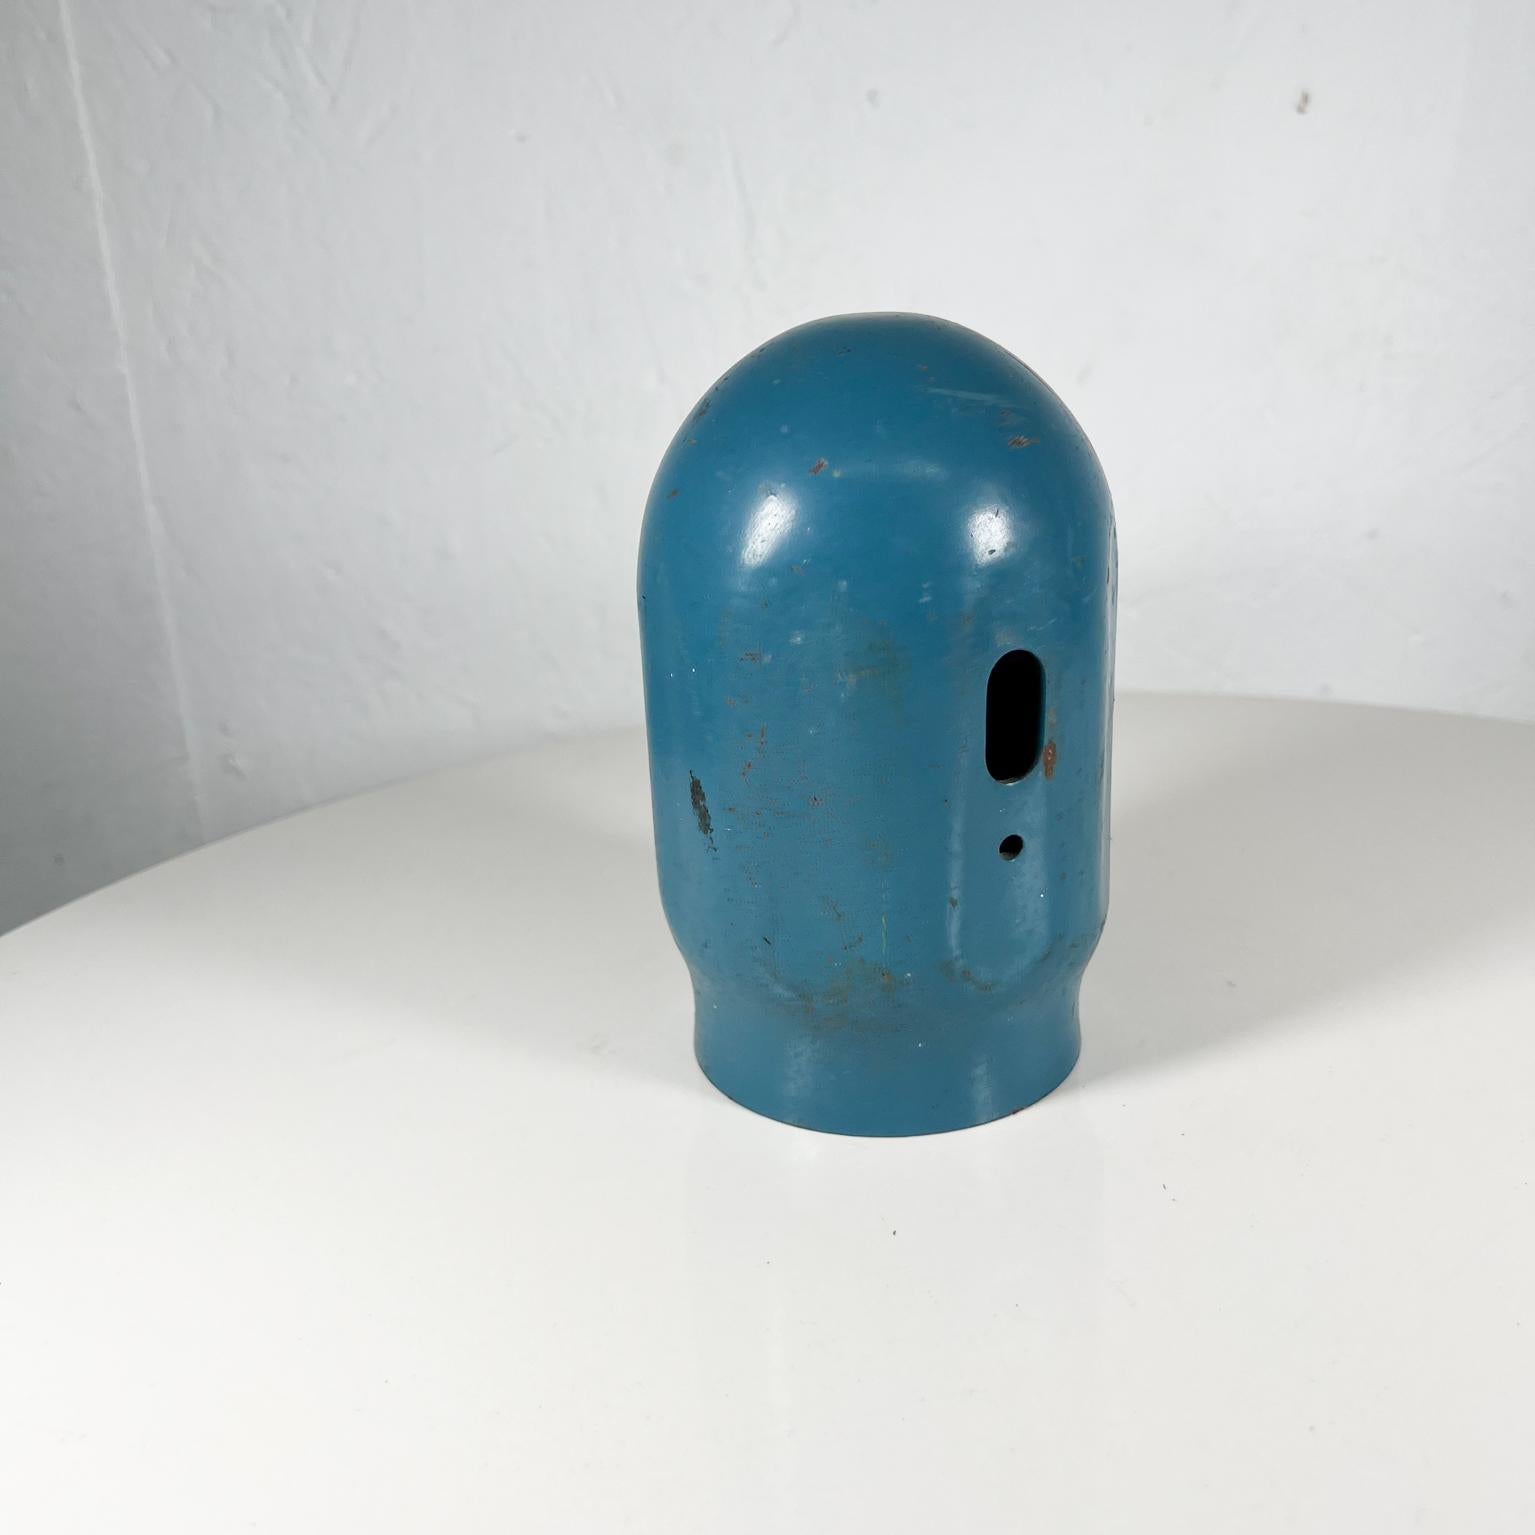 Late 20th Century Old Vintage Blue Threaded Gas Cylinder Cap